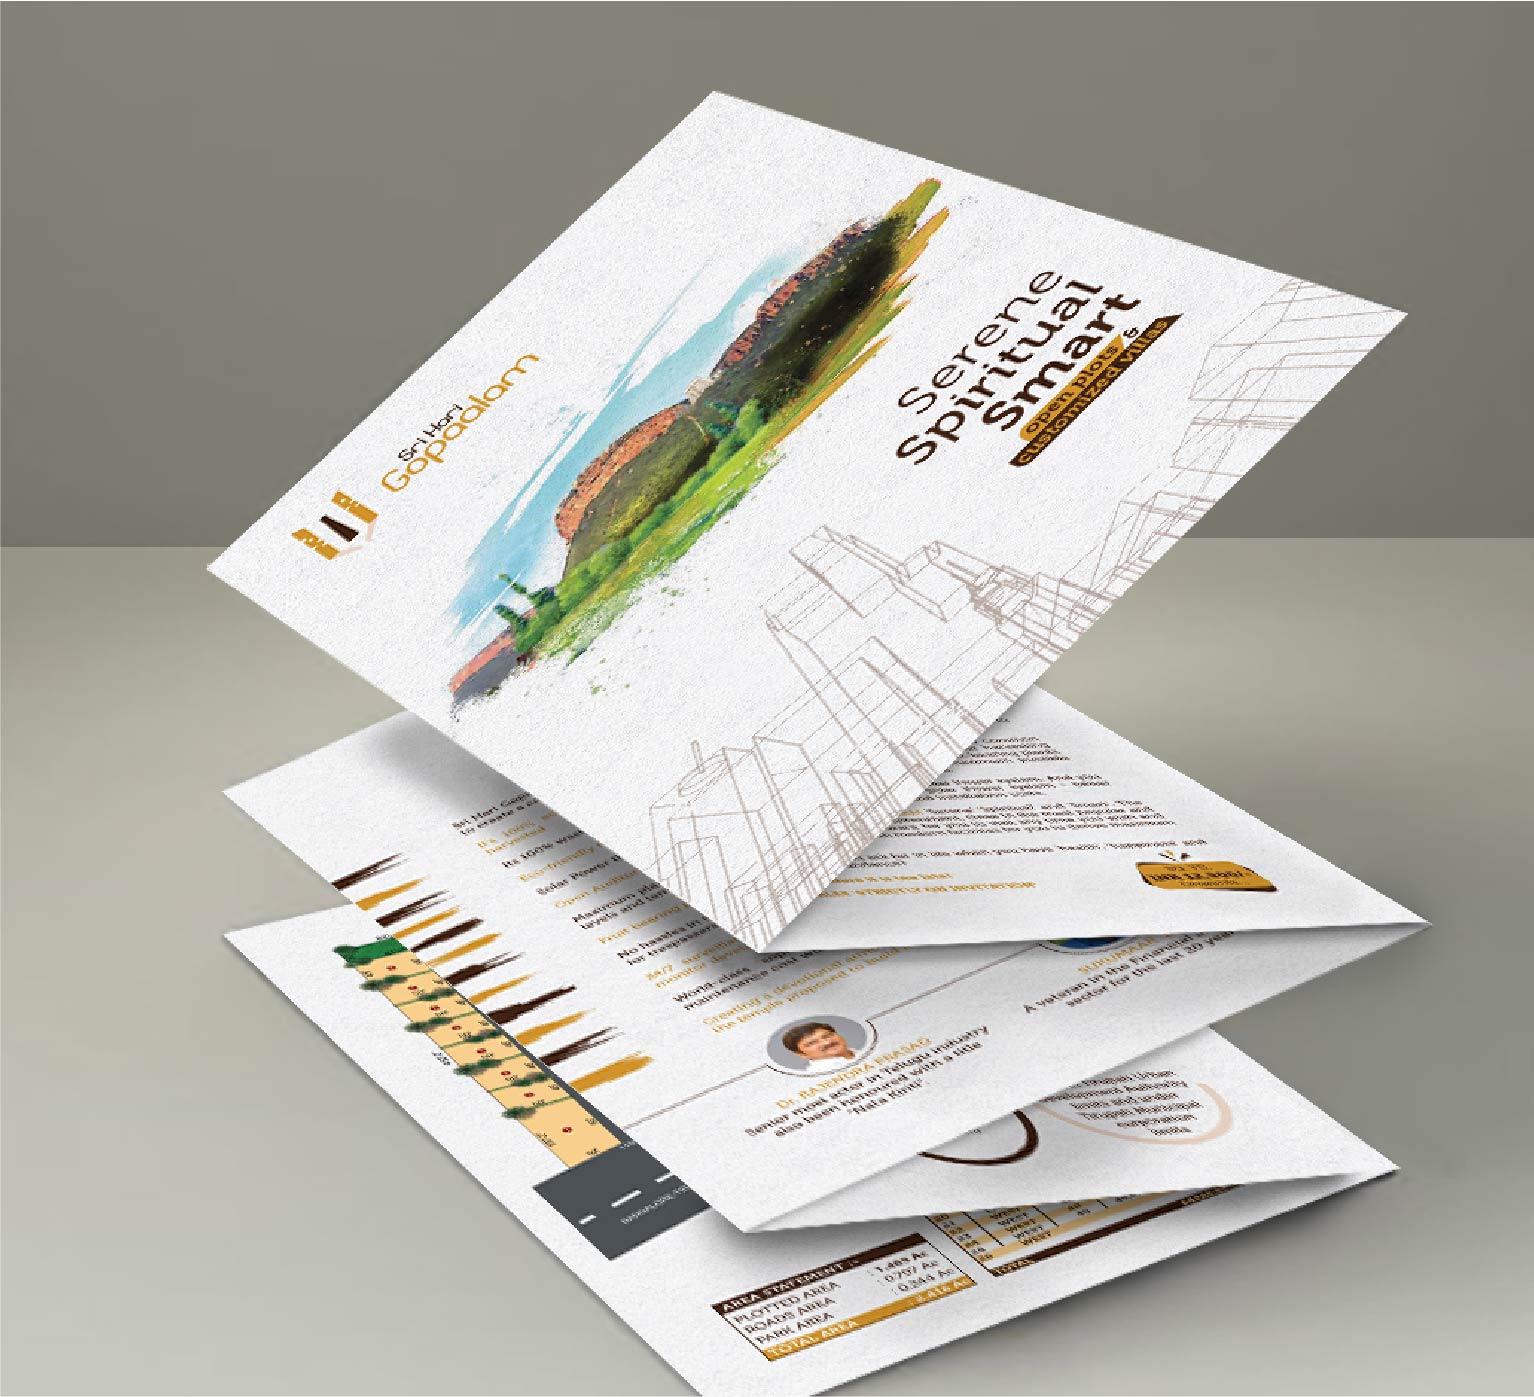 Brochure designing work done by Gruve Communications Agency for a real estate company in Hyderabad.